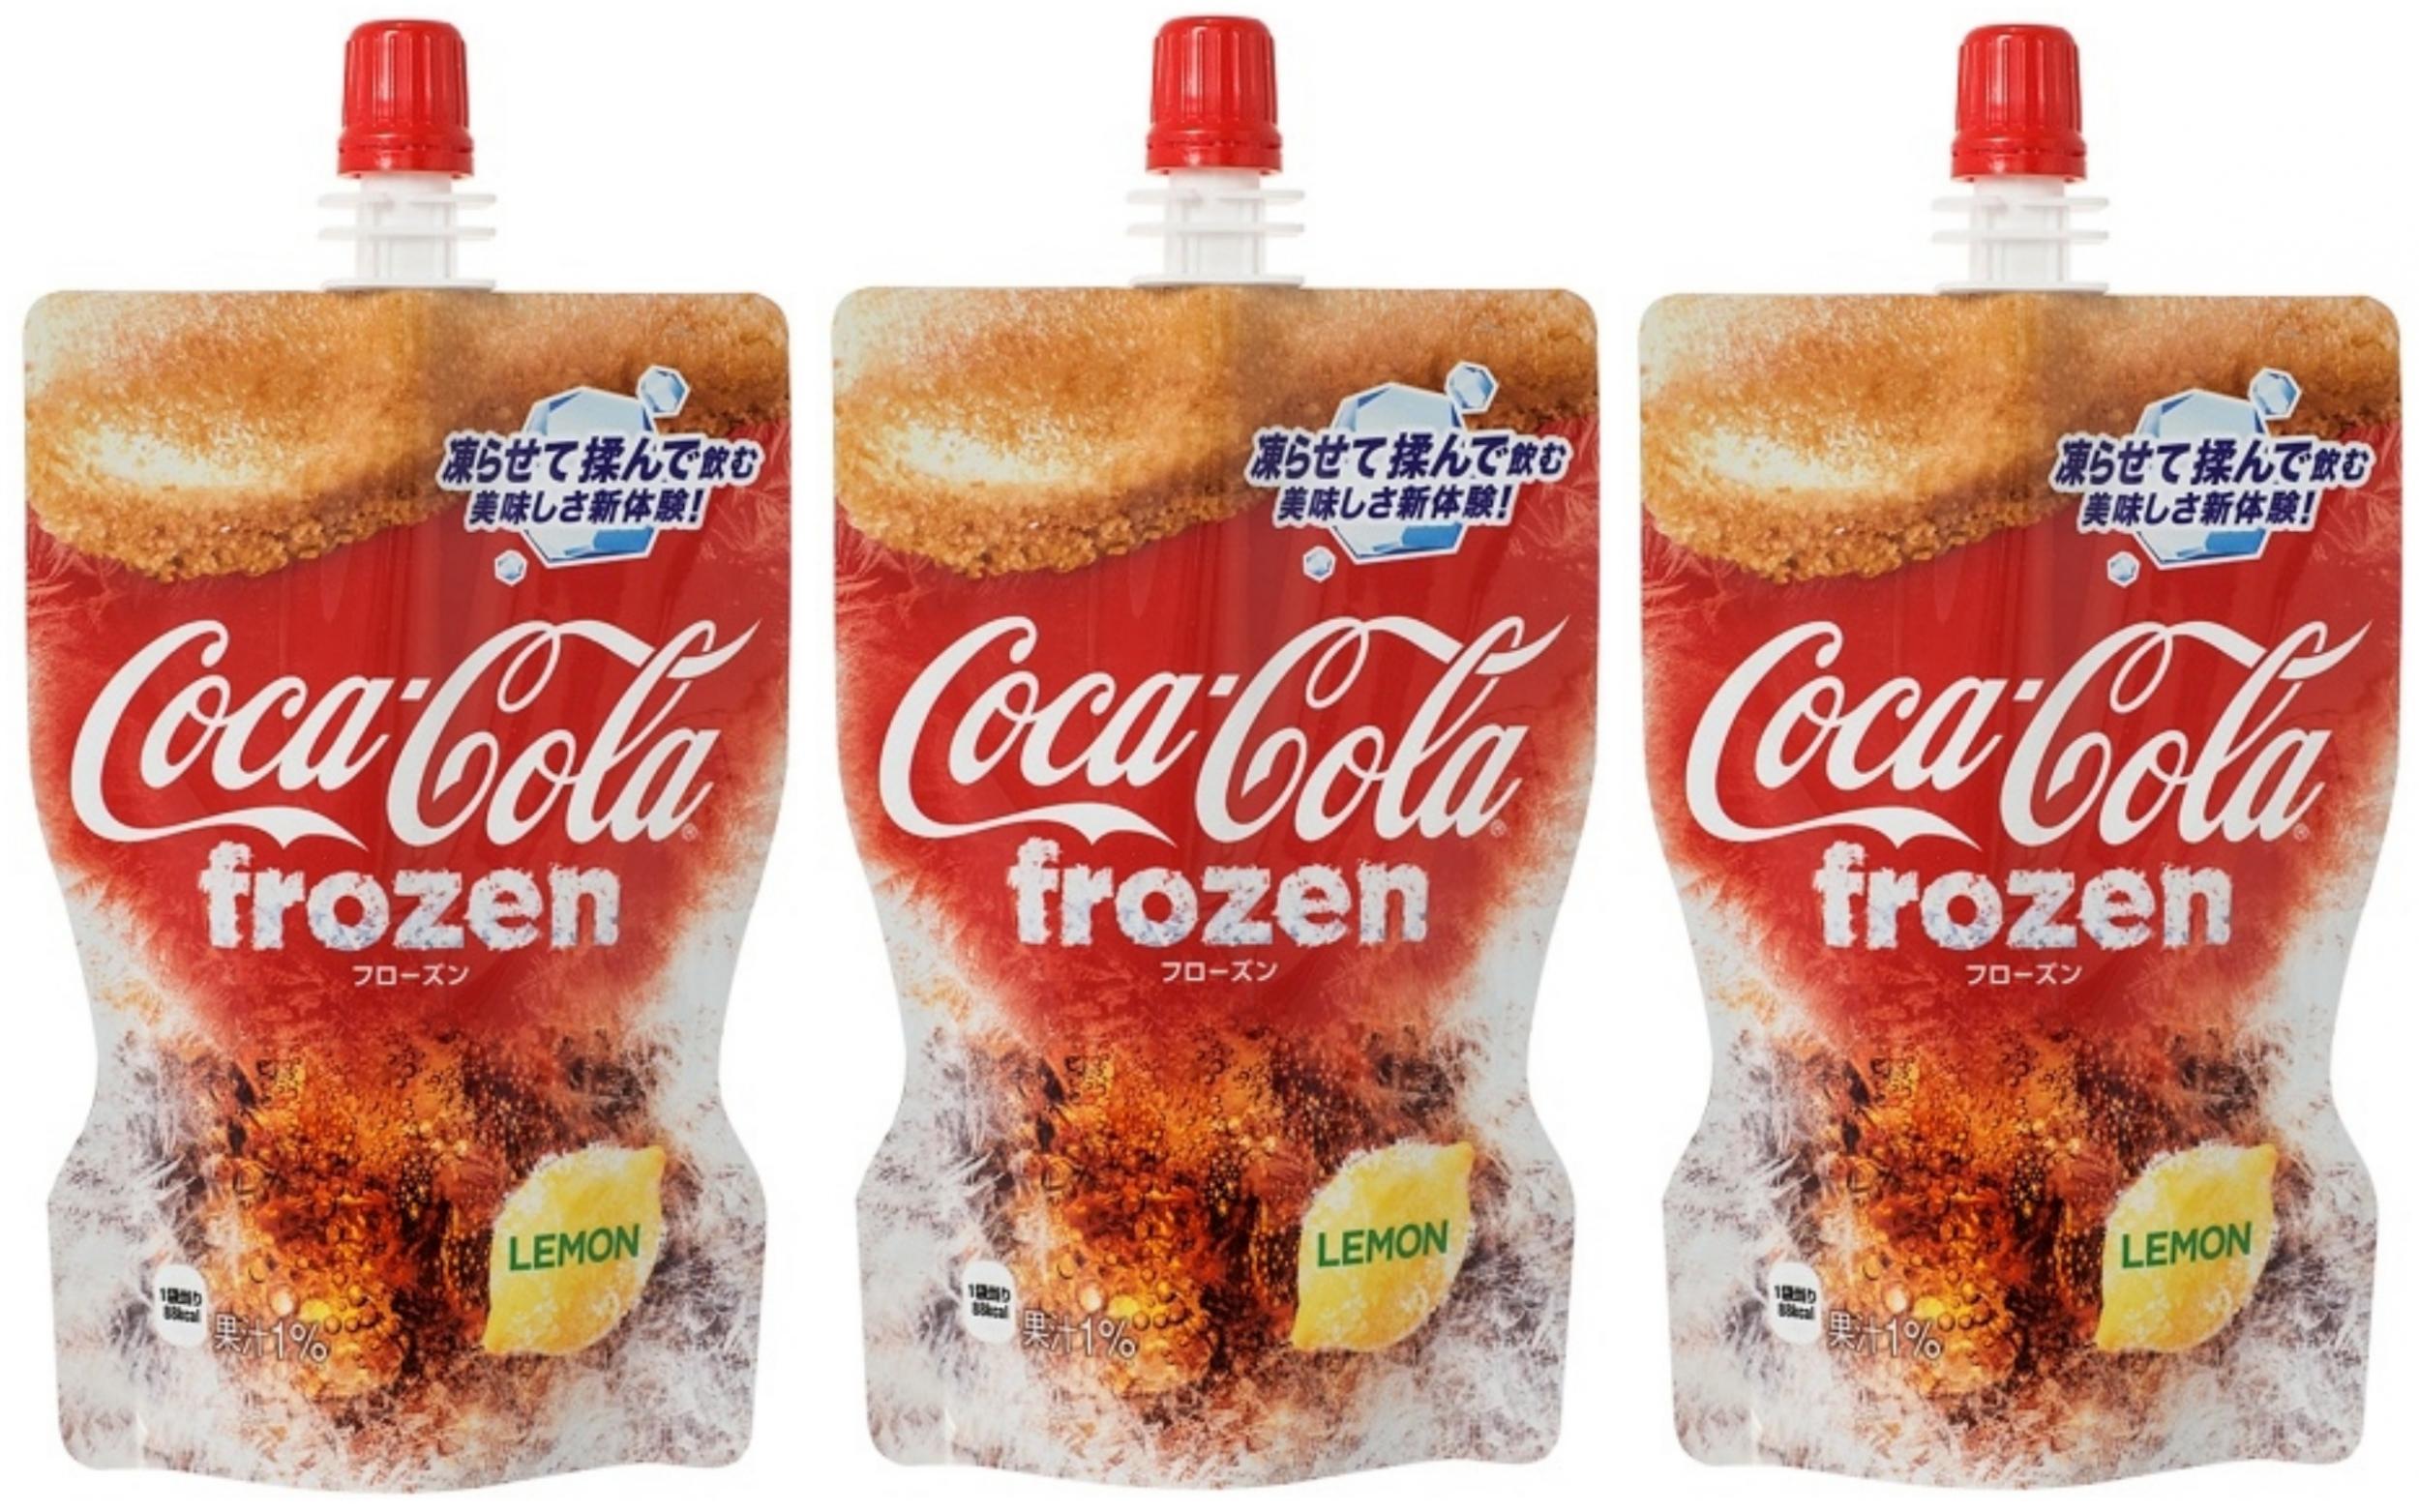 Coca-Cola launches world's first official Coke slushies, The Independent